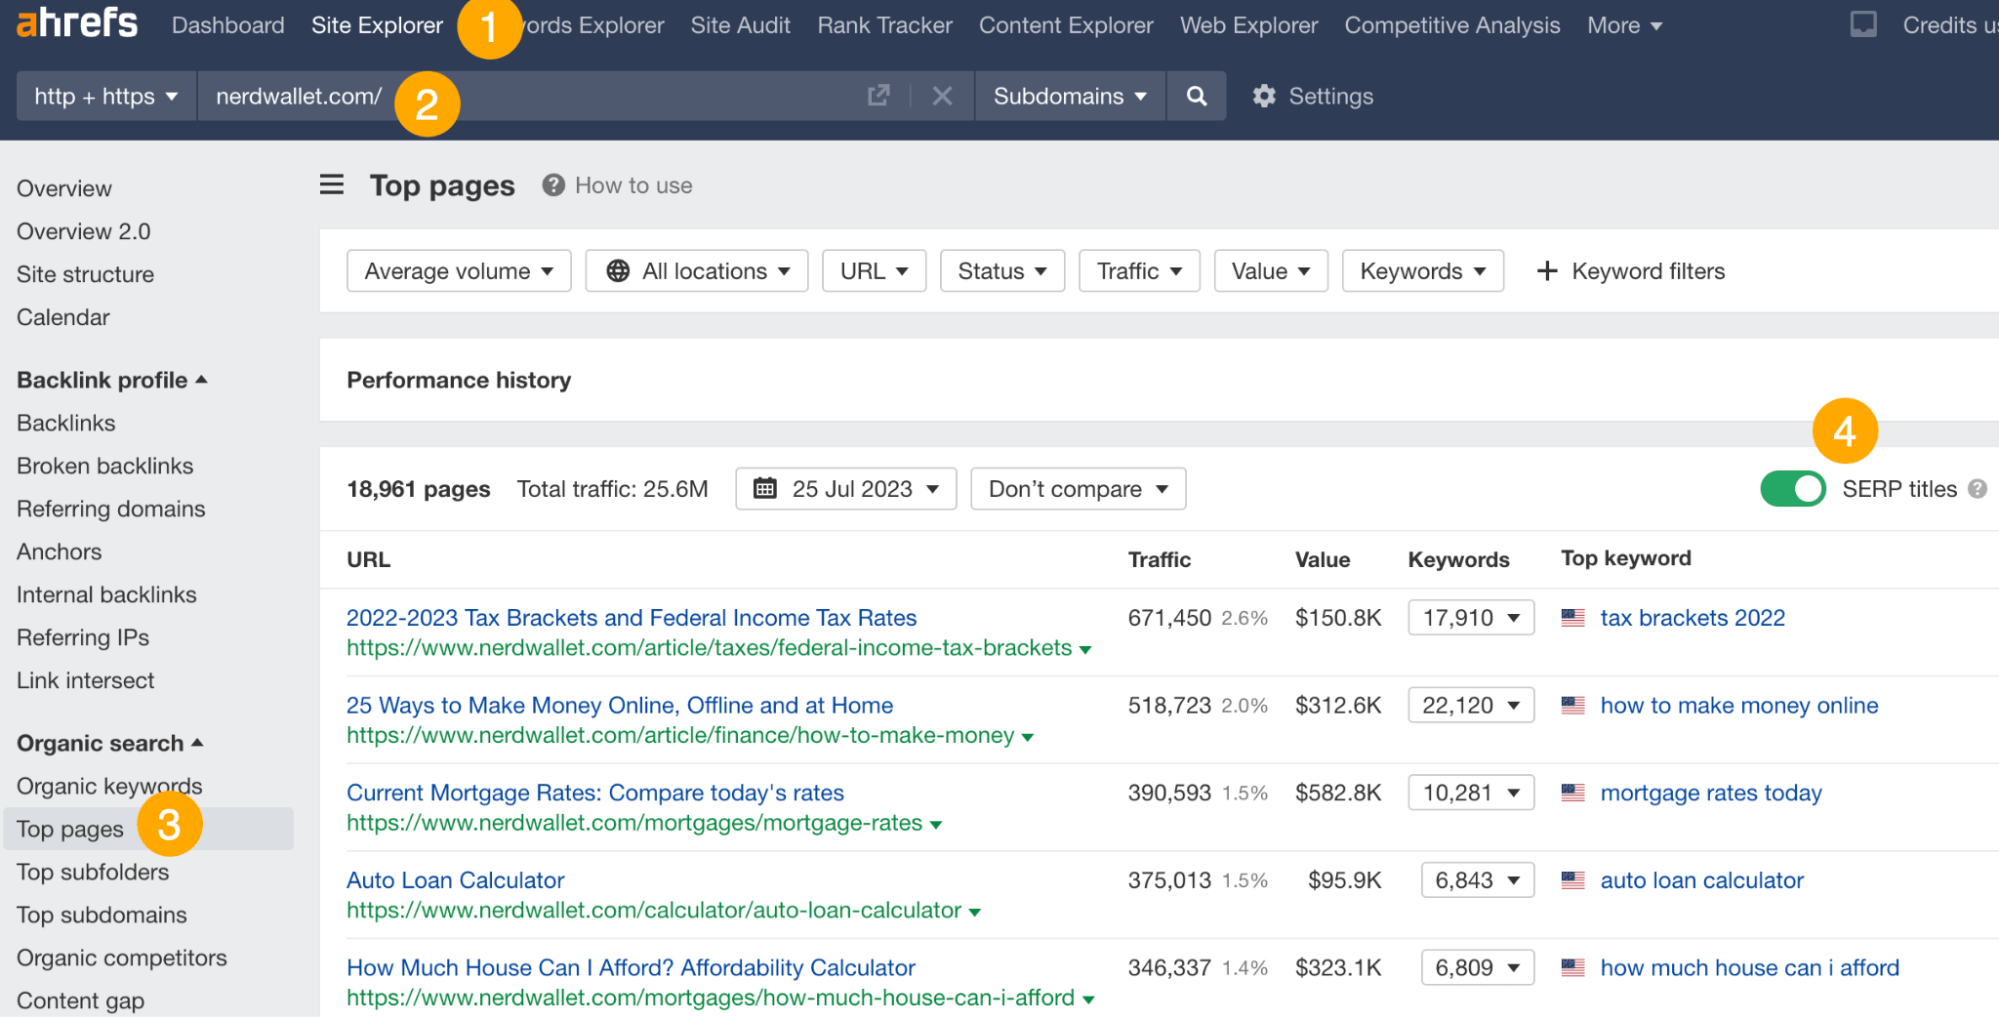 Finding opportunities to gain topic inspiration from, via Ahrefs' Site Explorer
